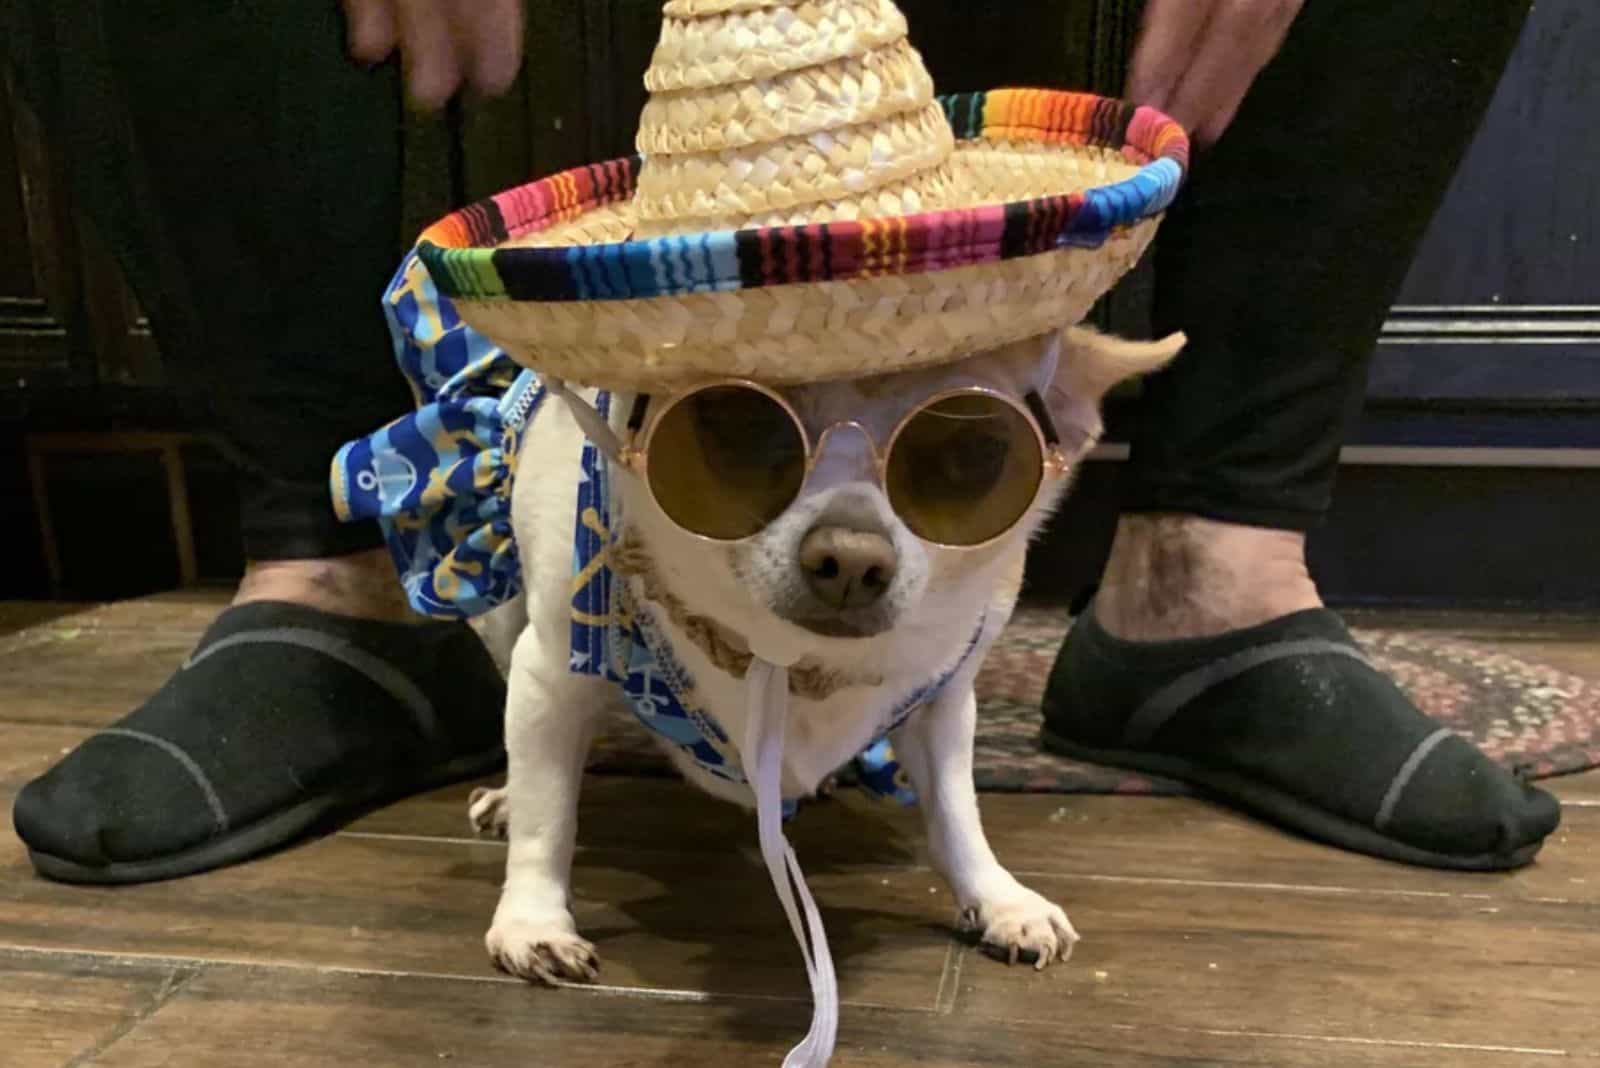 dog wearing a mariachi hat and swimming suit